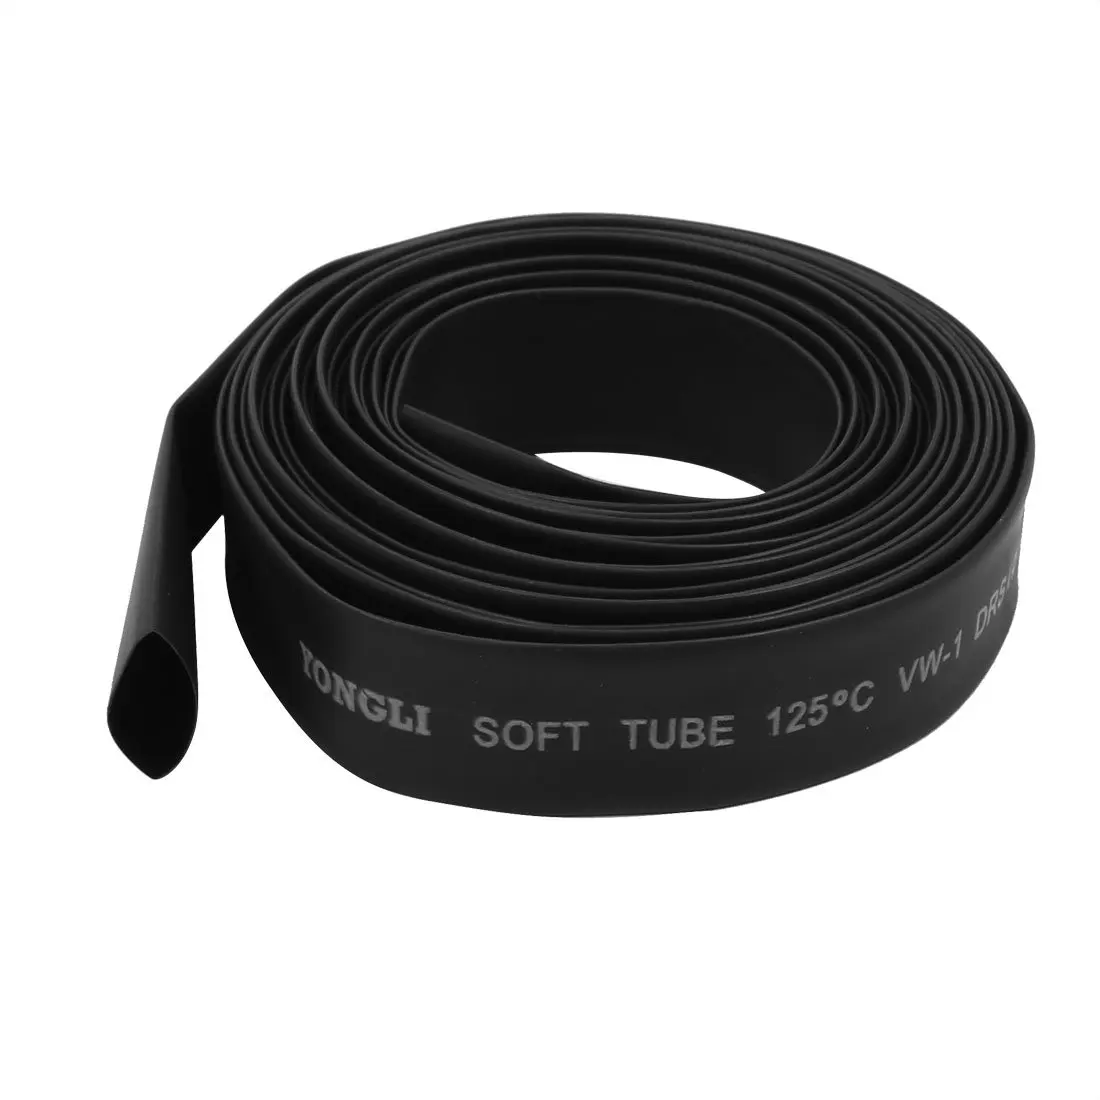 

Keszoox 14mm Dia 2:1 Heat Shrink Tubing Tube Sleeving Wire Cable Black 5M Length